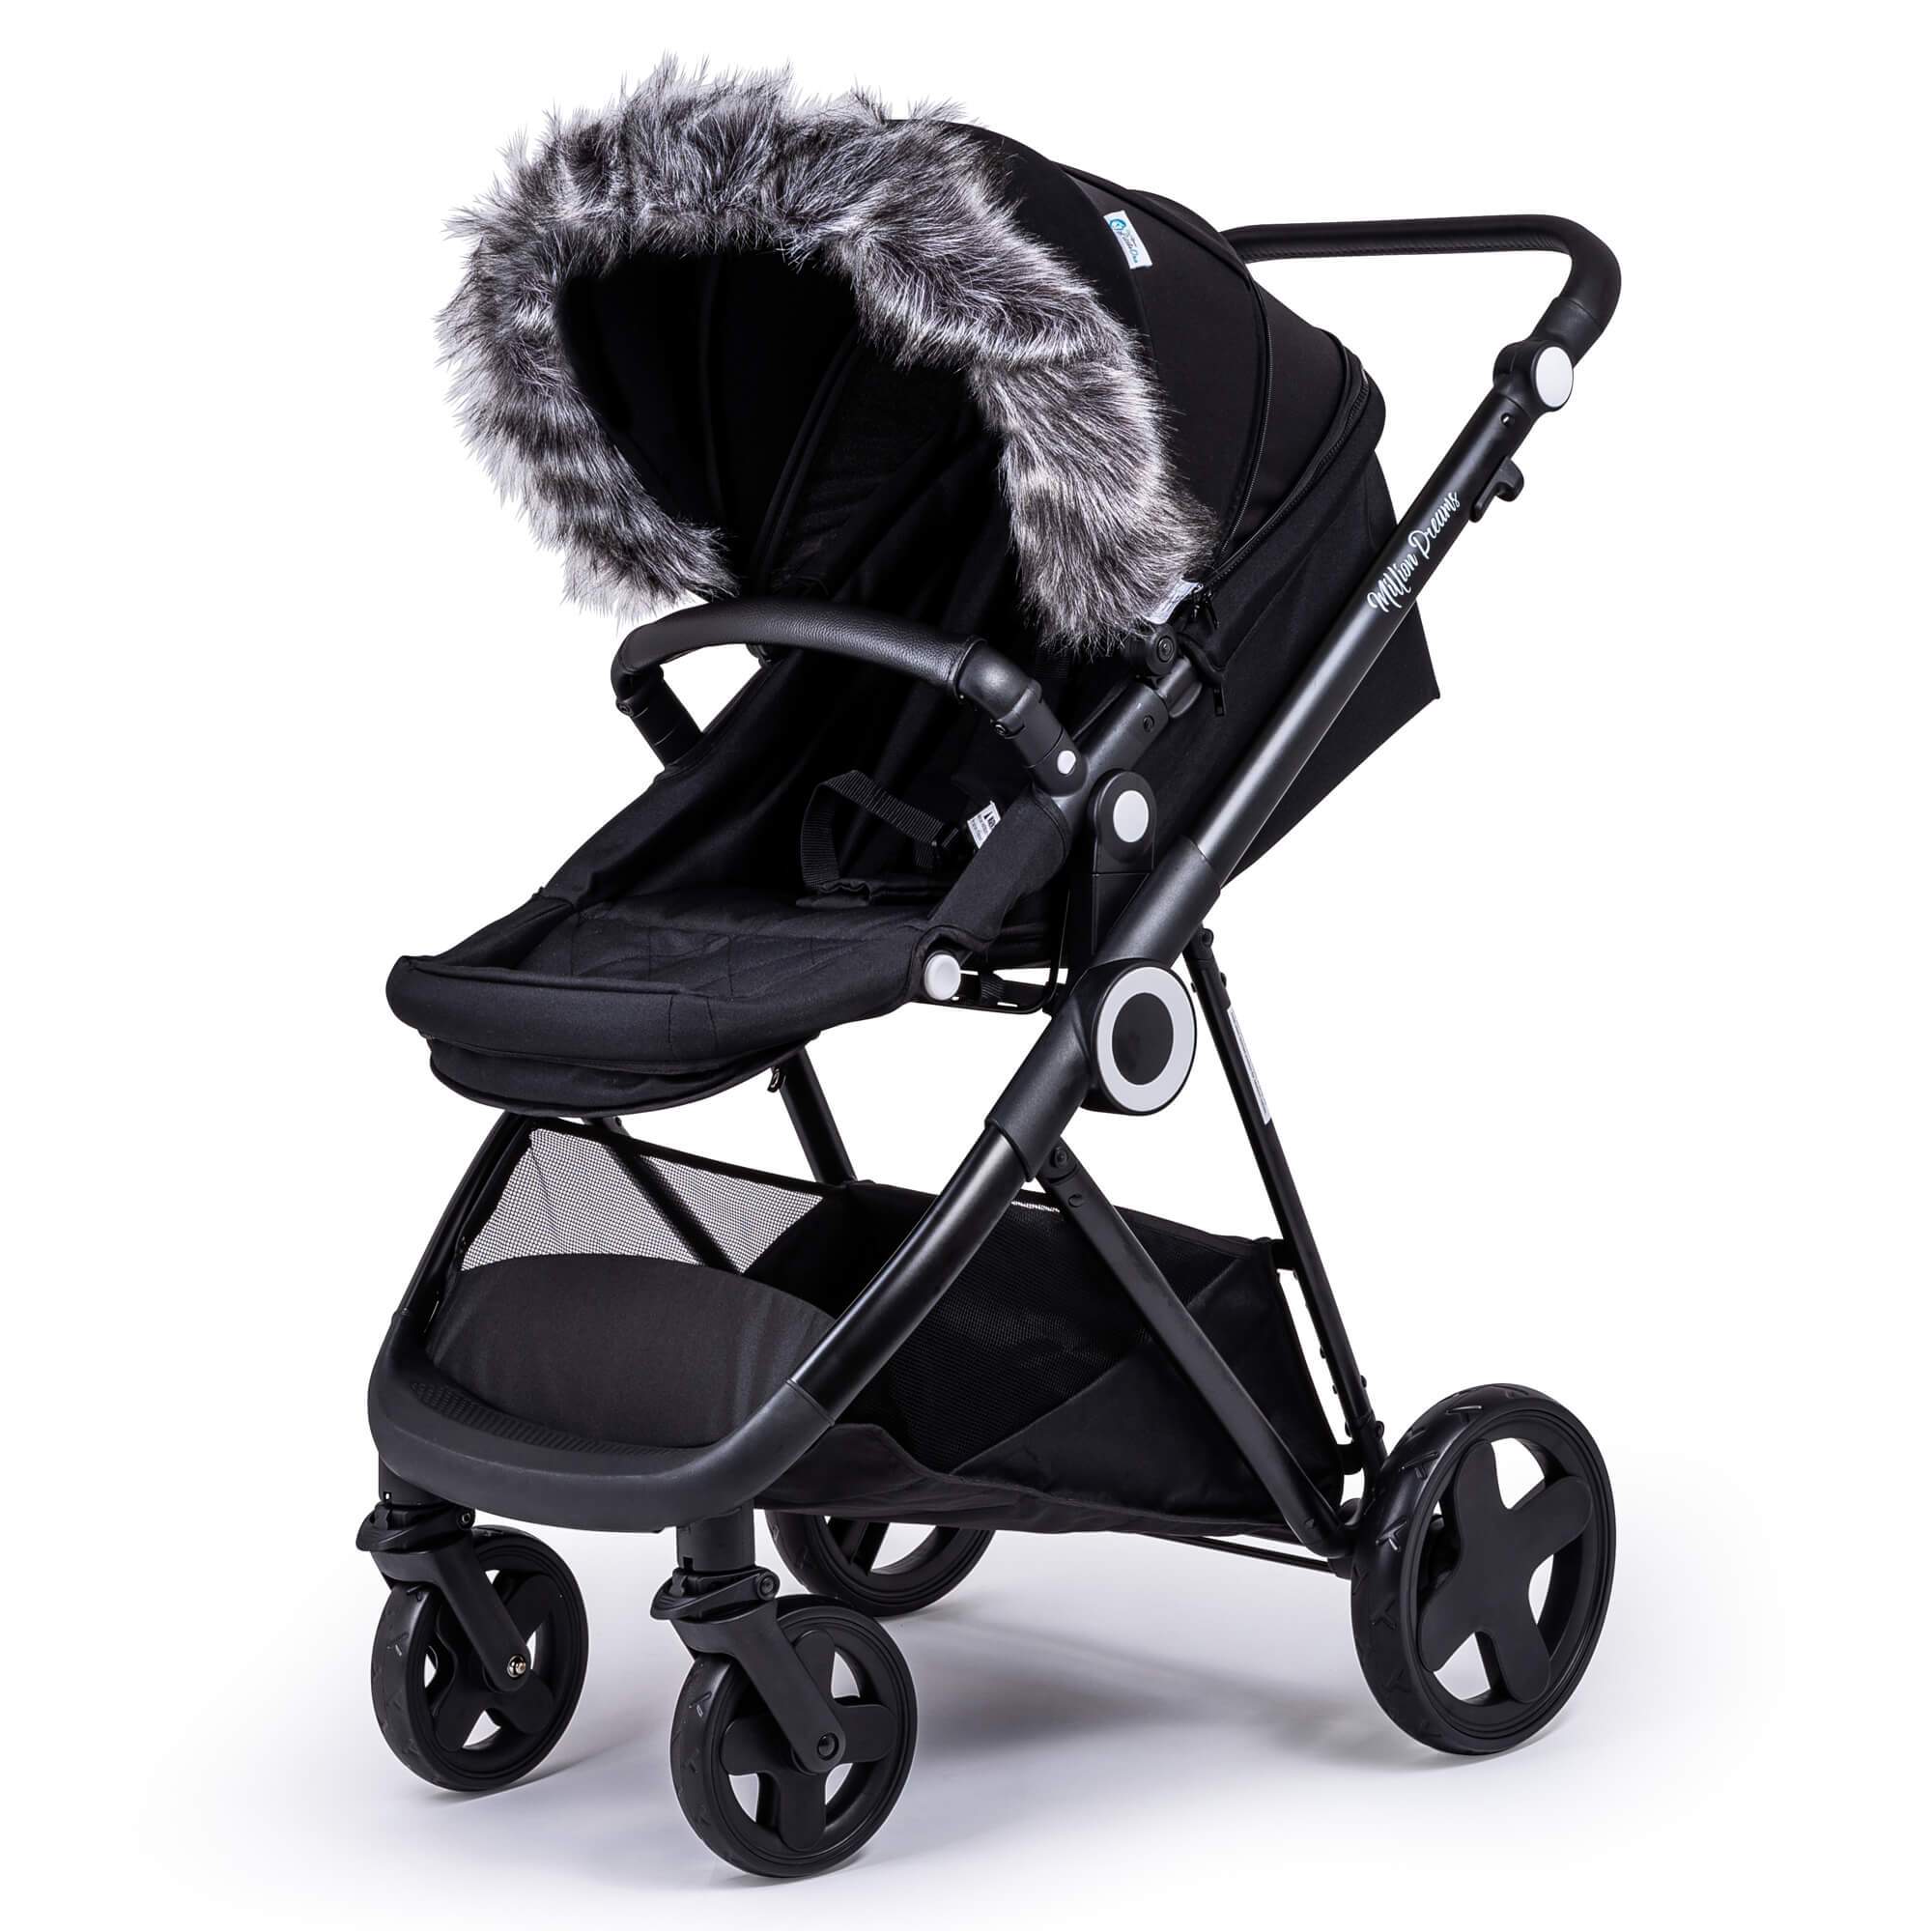 Pram Fur Hood Trim Attachment for Pushchair Compatible with Urban Detour - Dark Grey / Fits All Models | For Your Little One